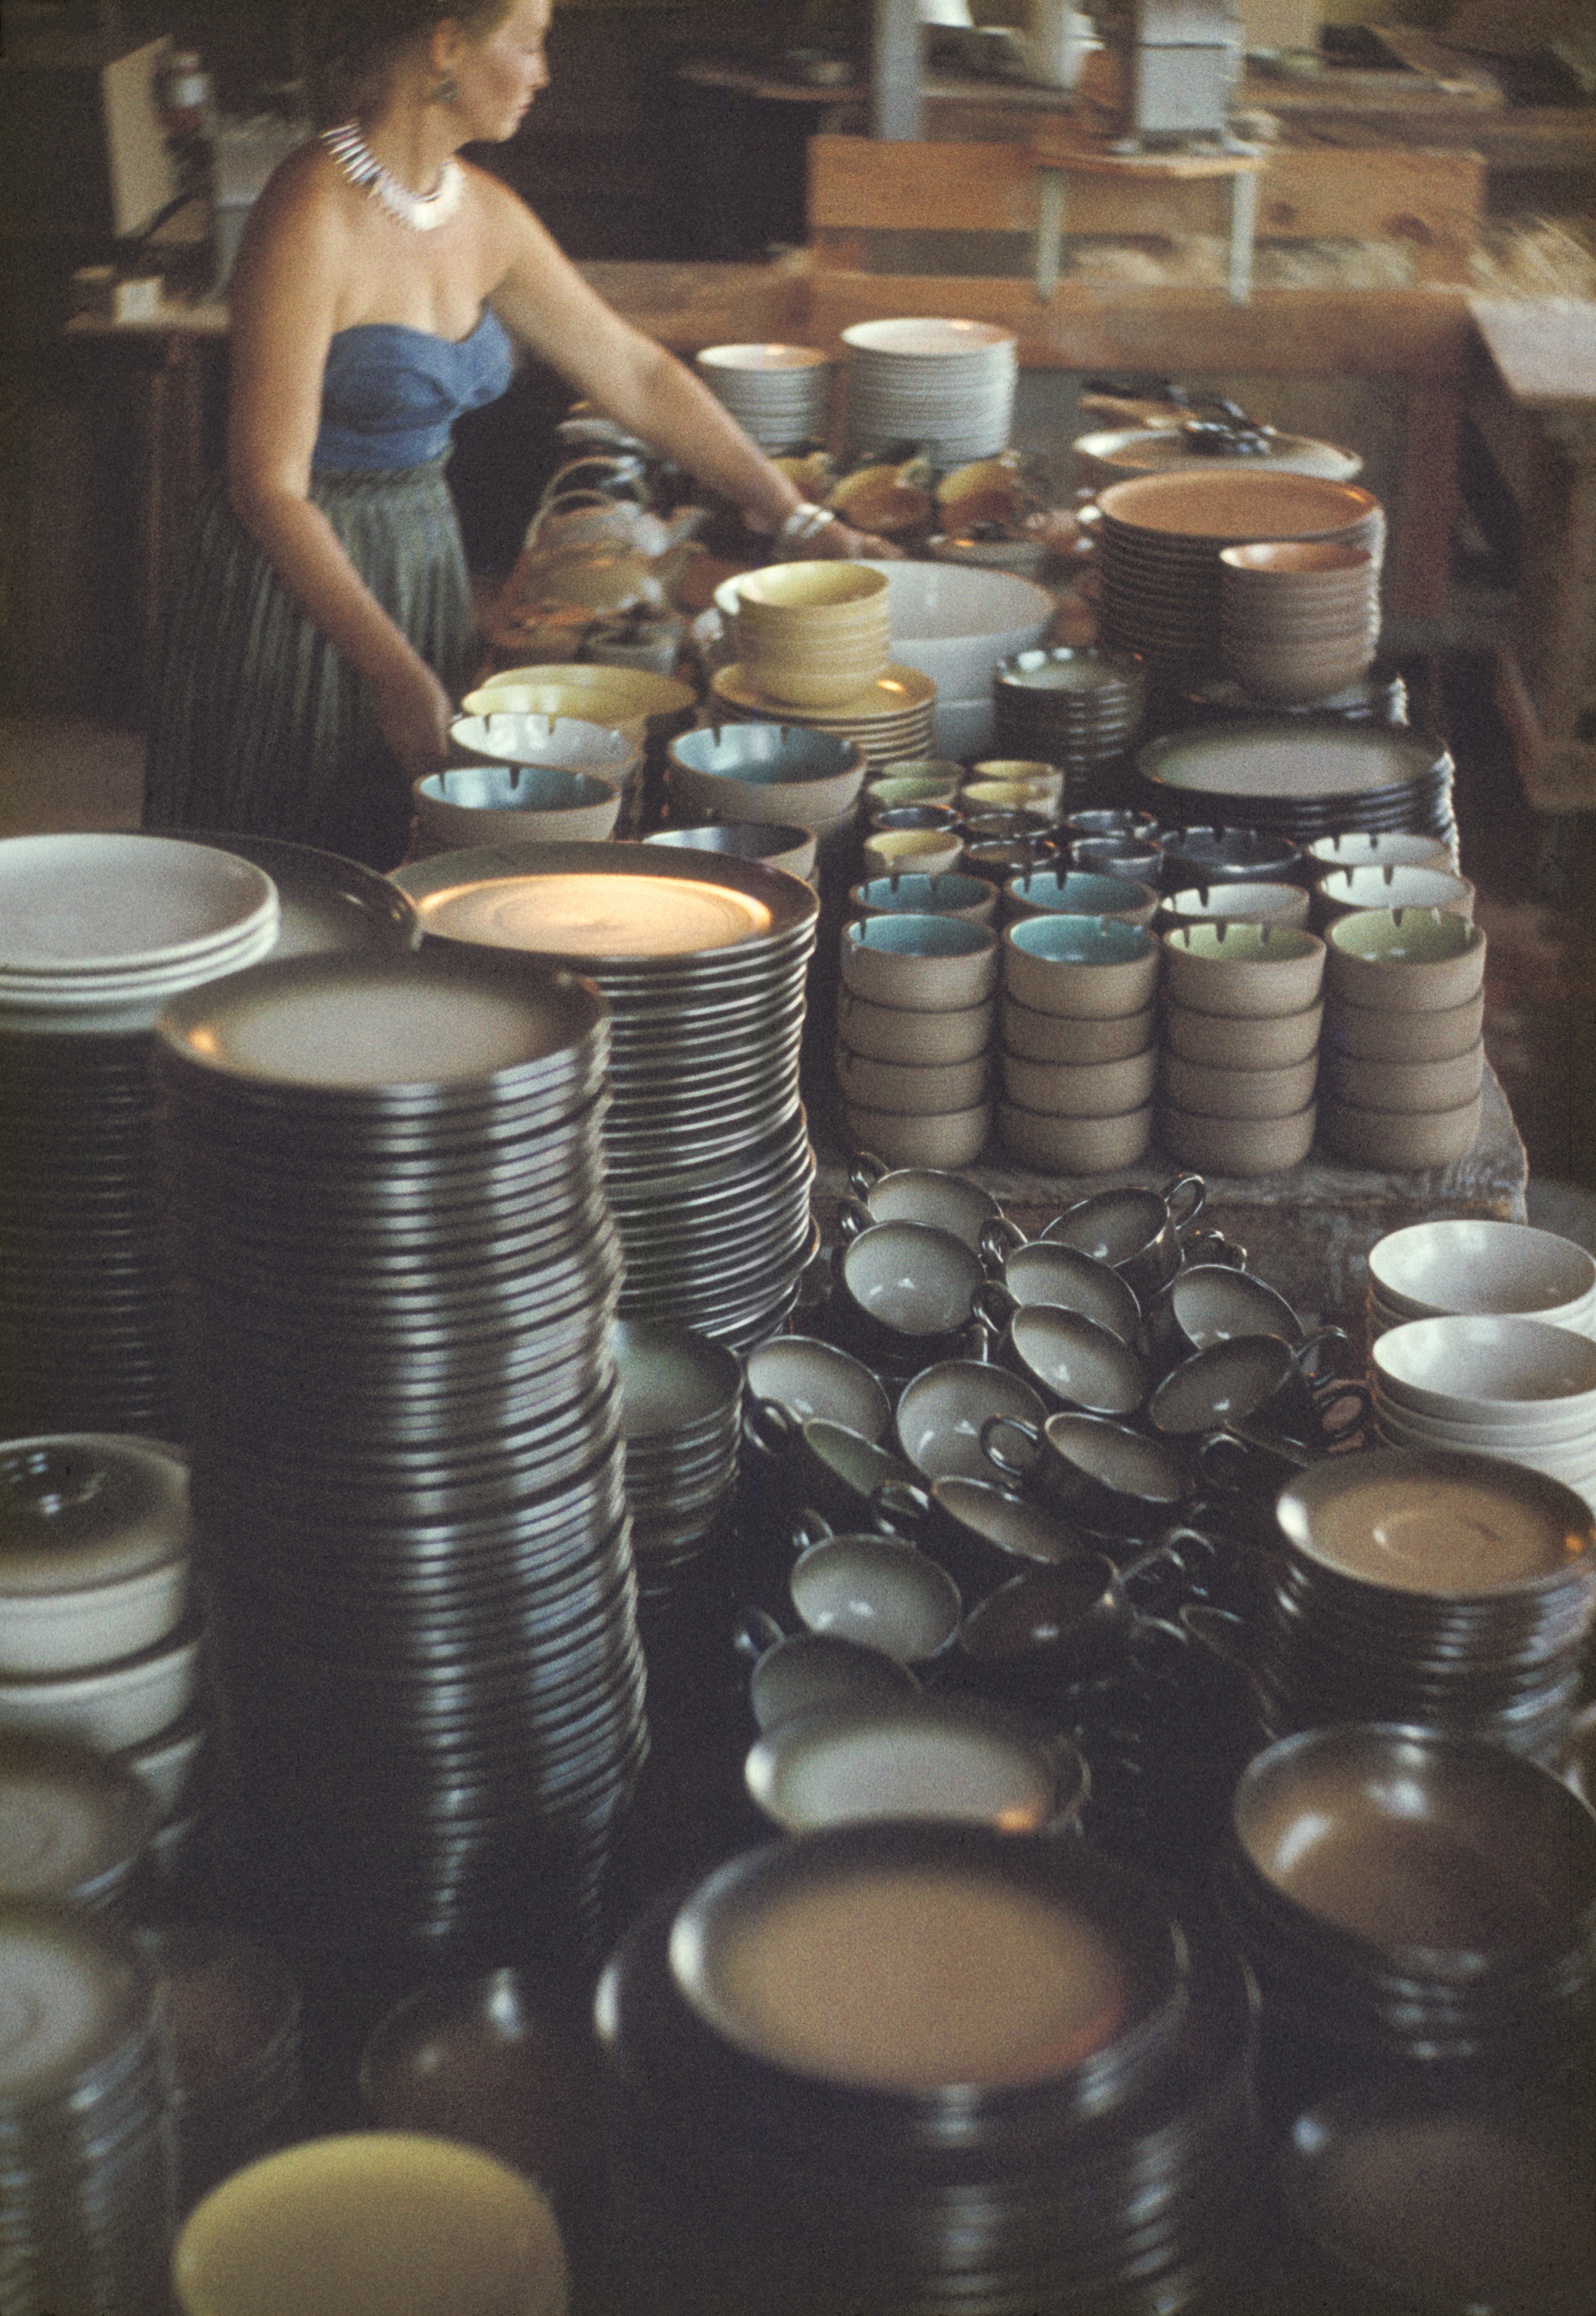 A woman in a dress organizing stacks of plates, cups, ashtrays and bowls on a long table.